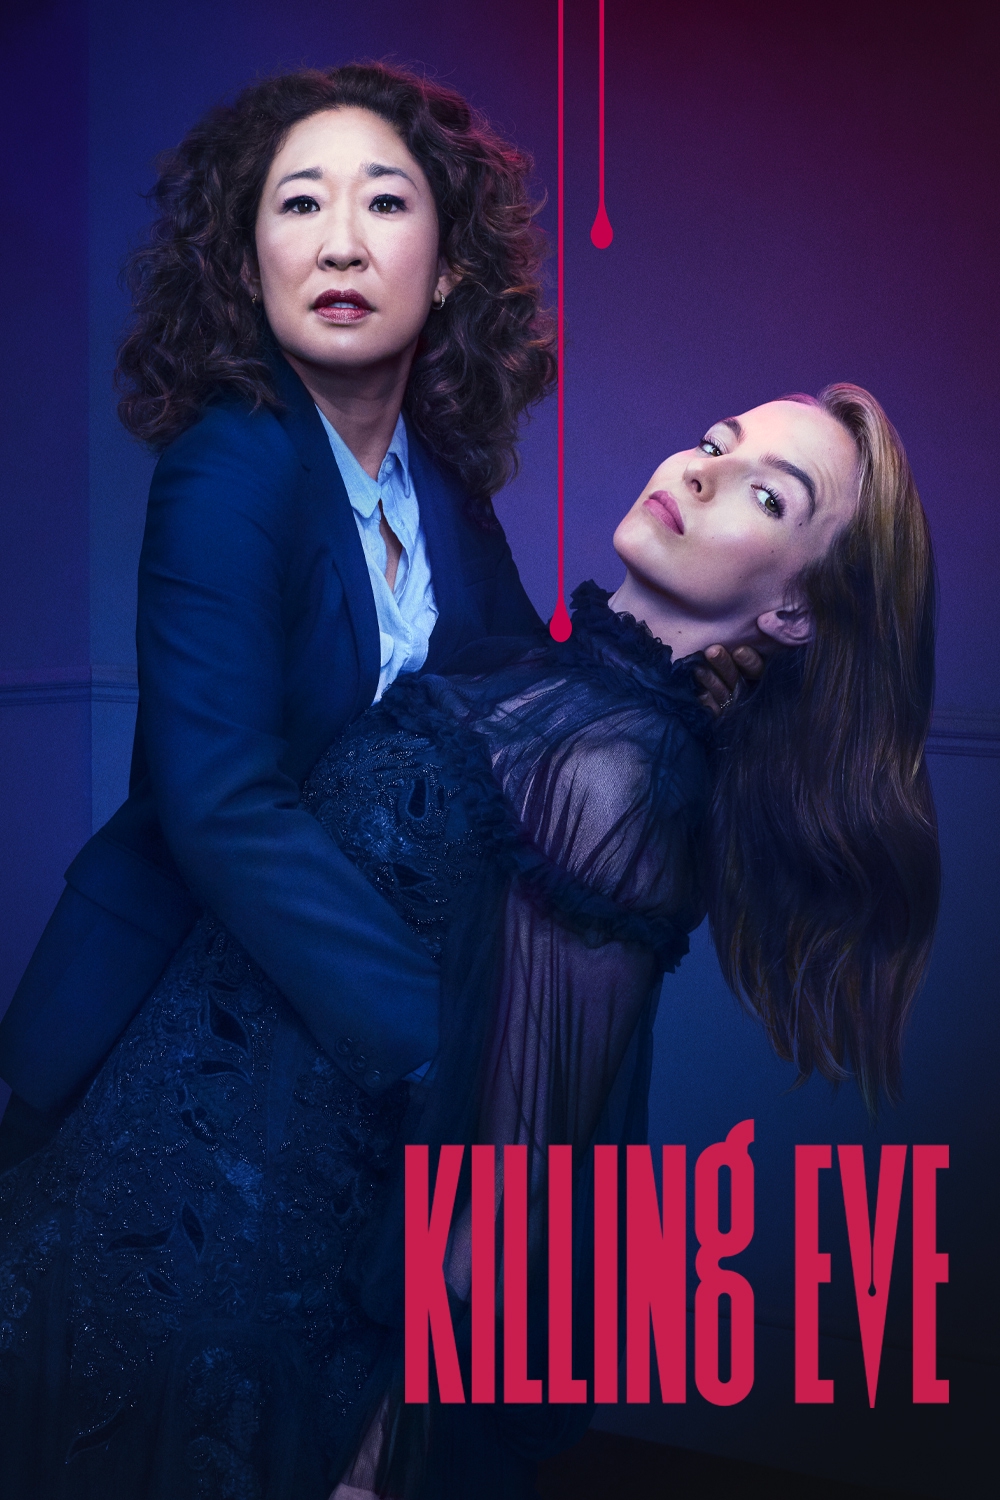 Watch Killing Eve Online | Now Streaming | Stan.